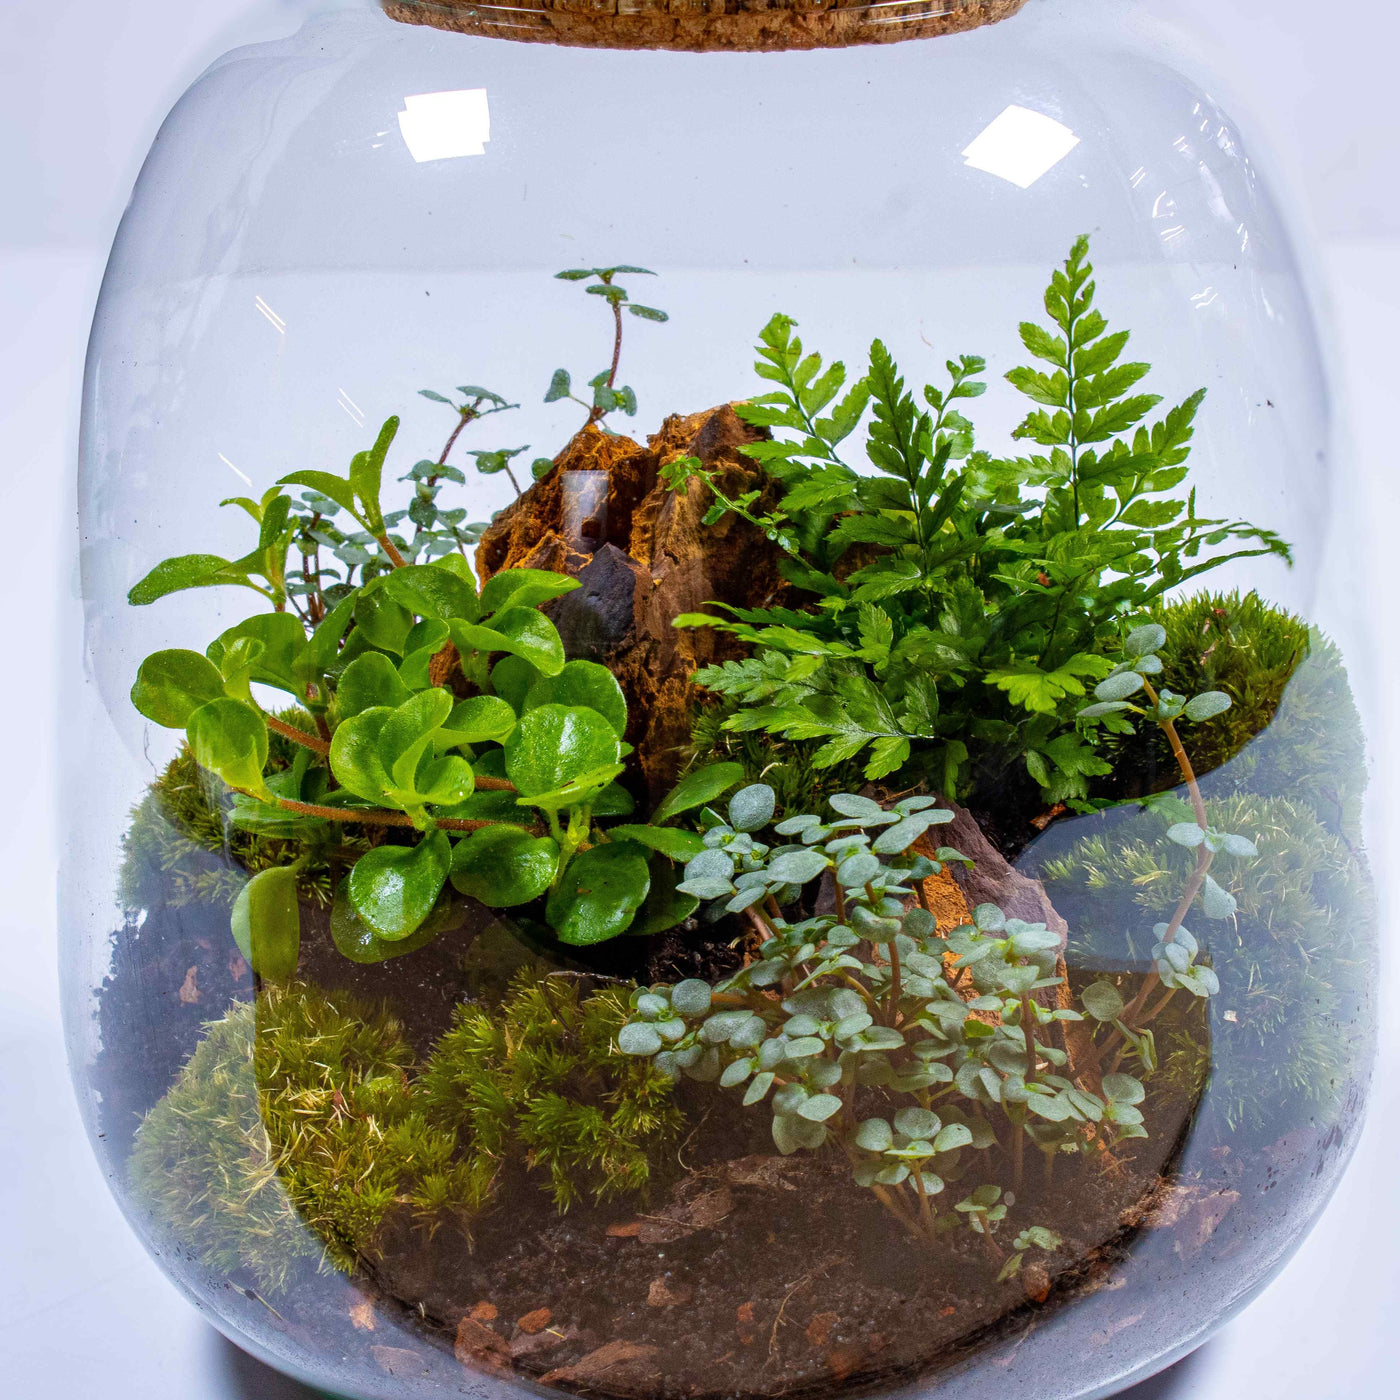 UK green gift: Tropical terrarium kit with lush live plants and moss in a glass container.